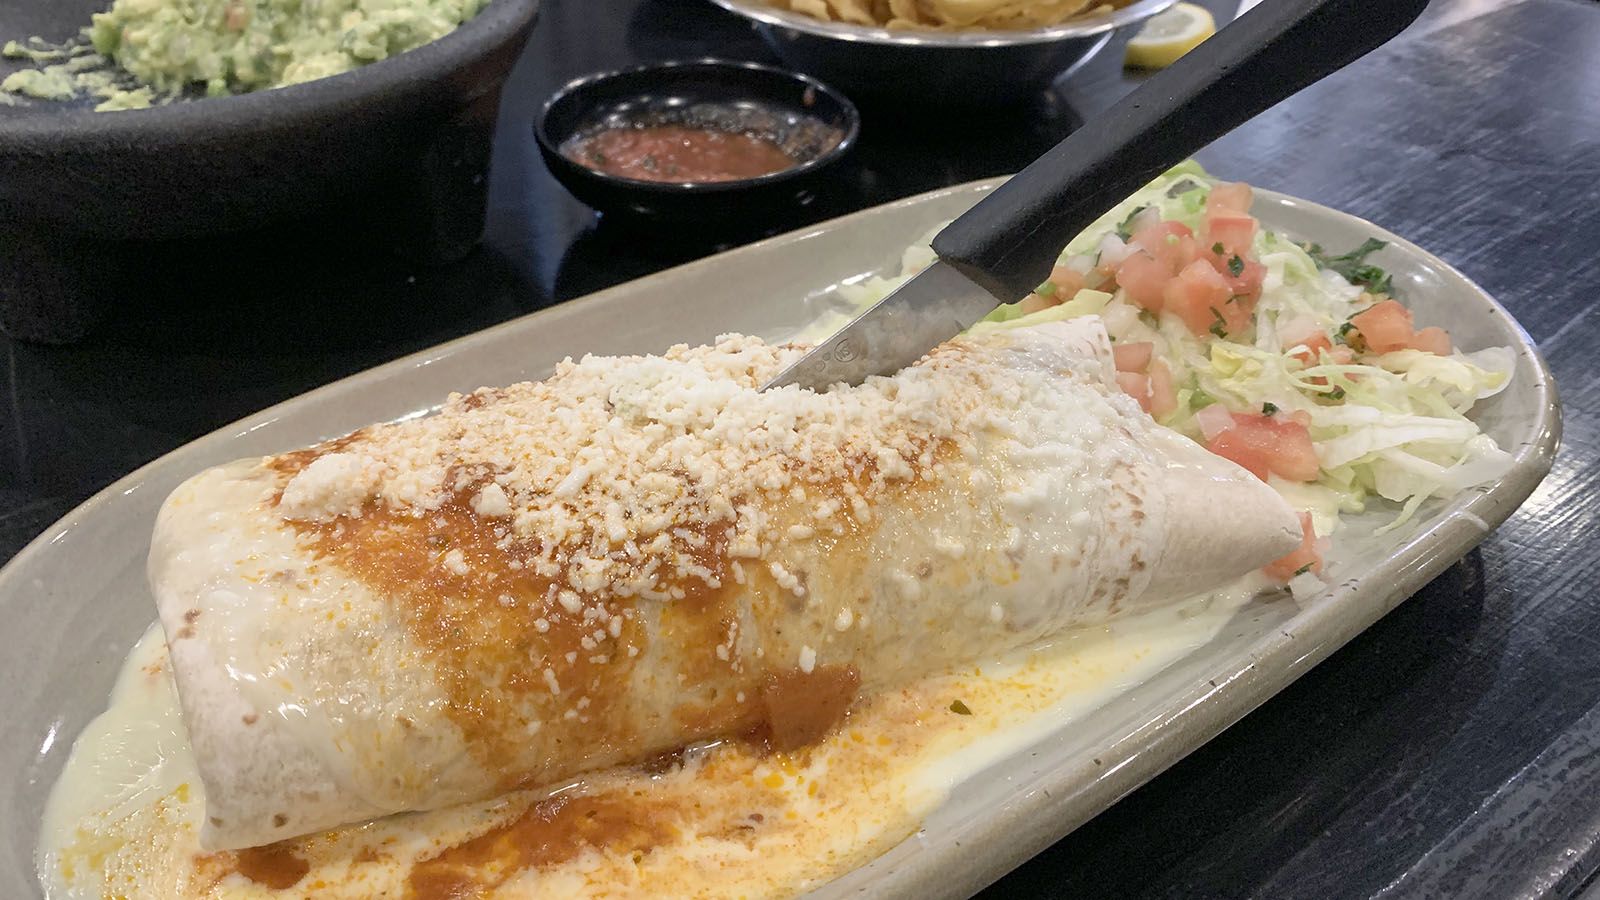 You won’t be disappointed with the Mexican fare served up at Arcos, 7510 Winchester Road, which includes the wet burrito.